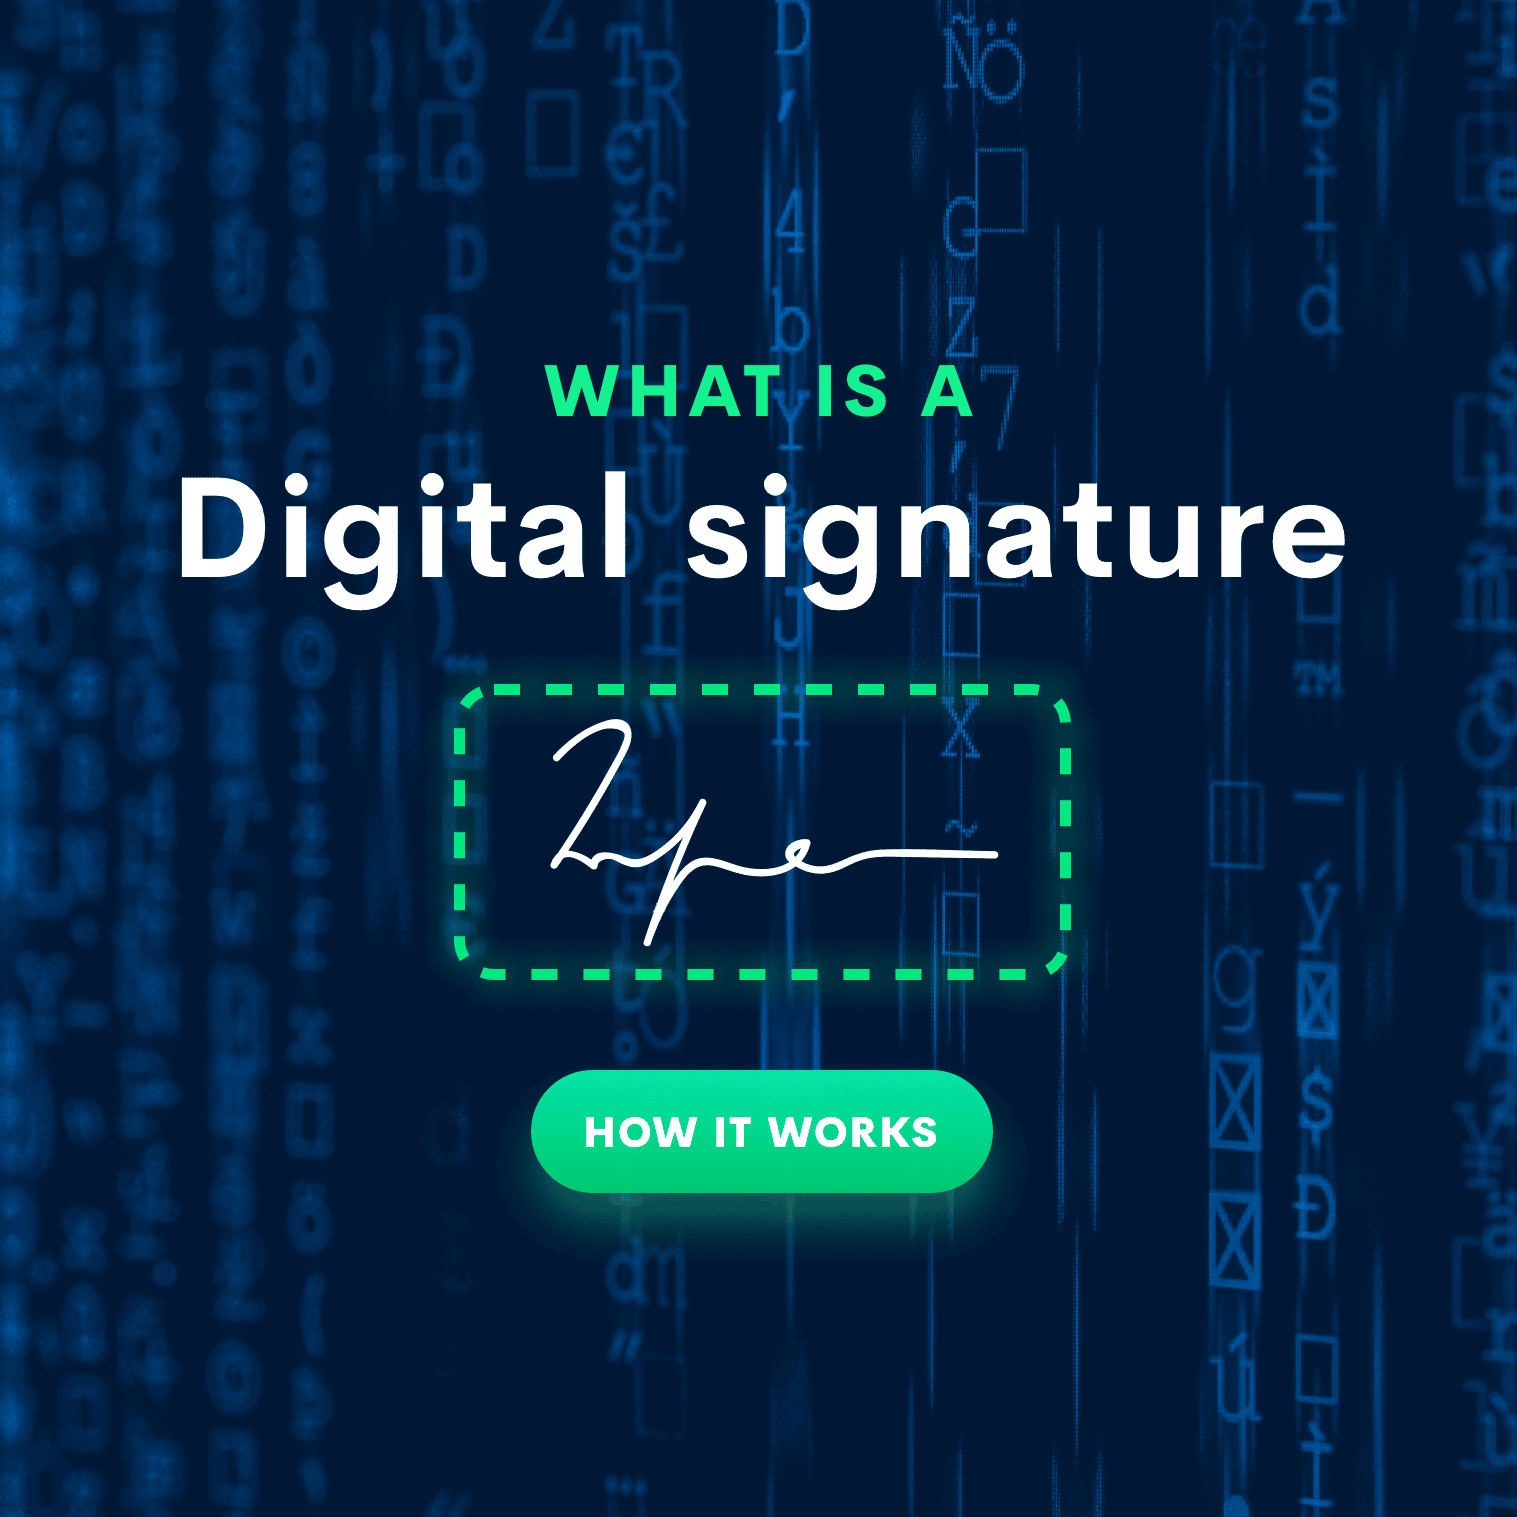 how does a digital signature work image 1